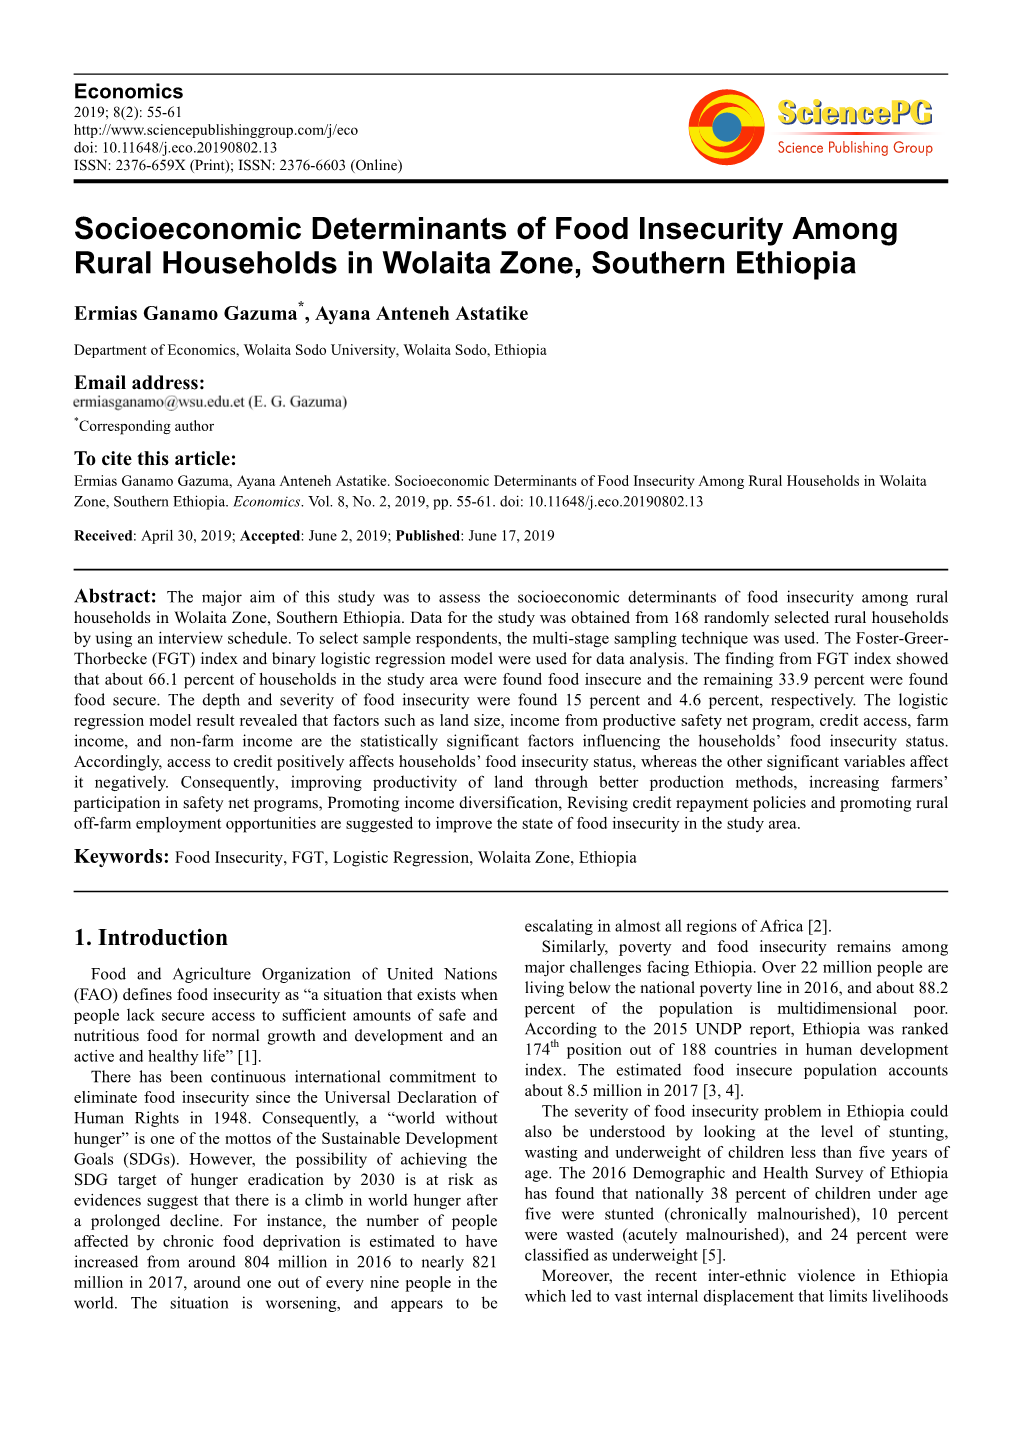 Socioeconomic Determinants of Food Insecurity Among Rural Households in Wolaita Zone, Southern Ethiopia